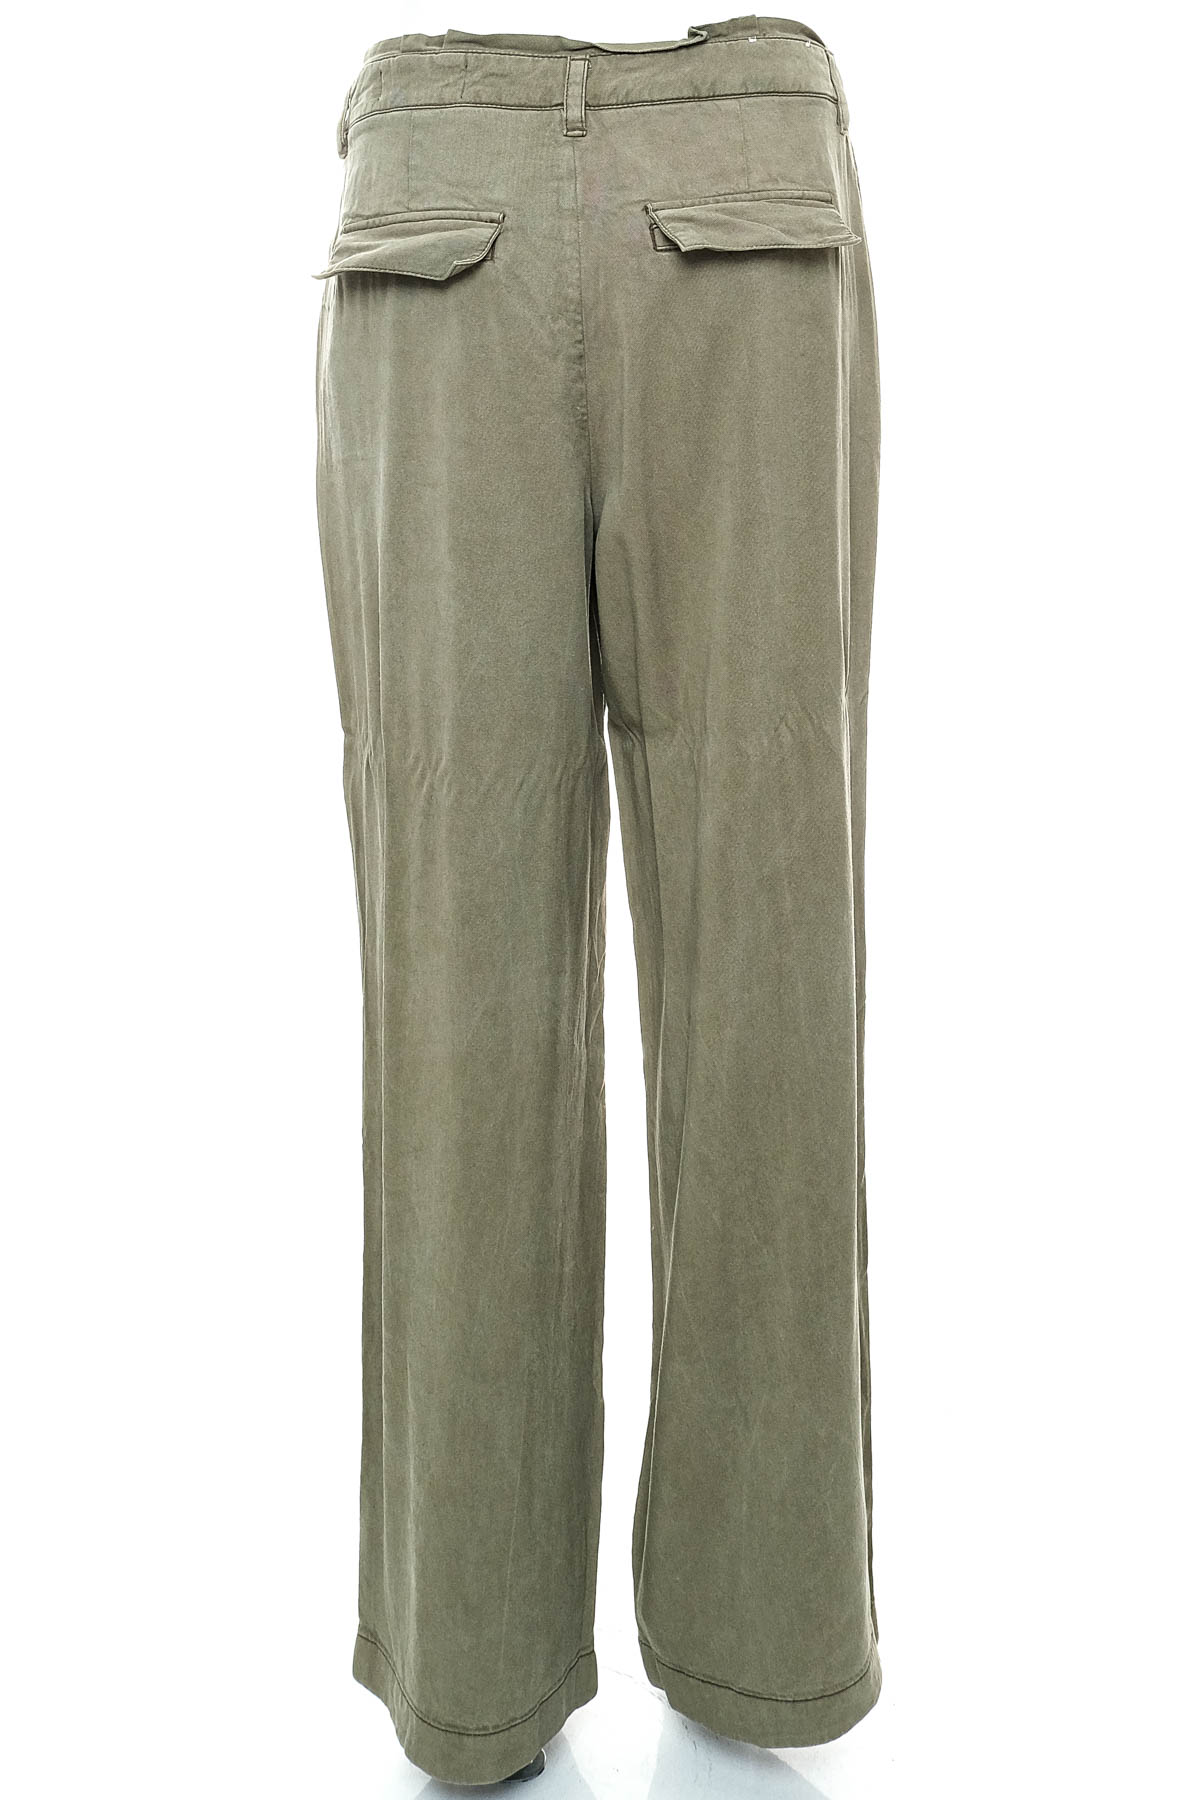 Women's trousers - S.Oliver - 1